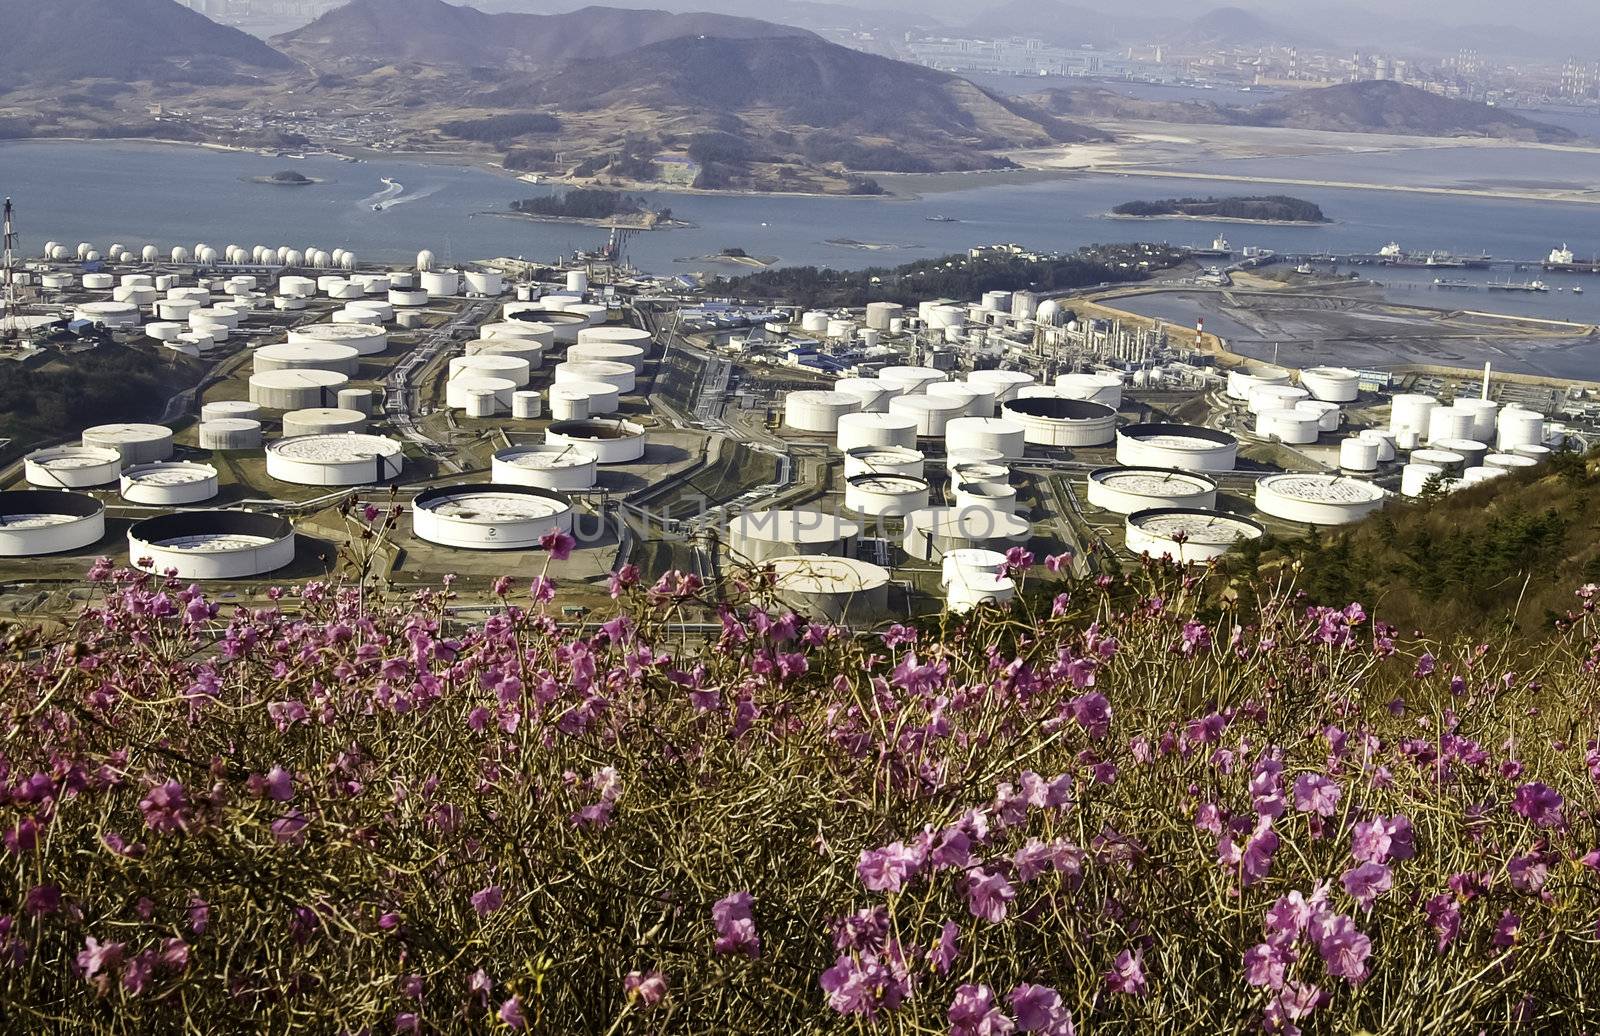 A large chemical manufacturing plant near the ocean and nature